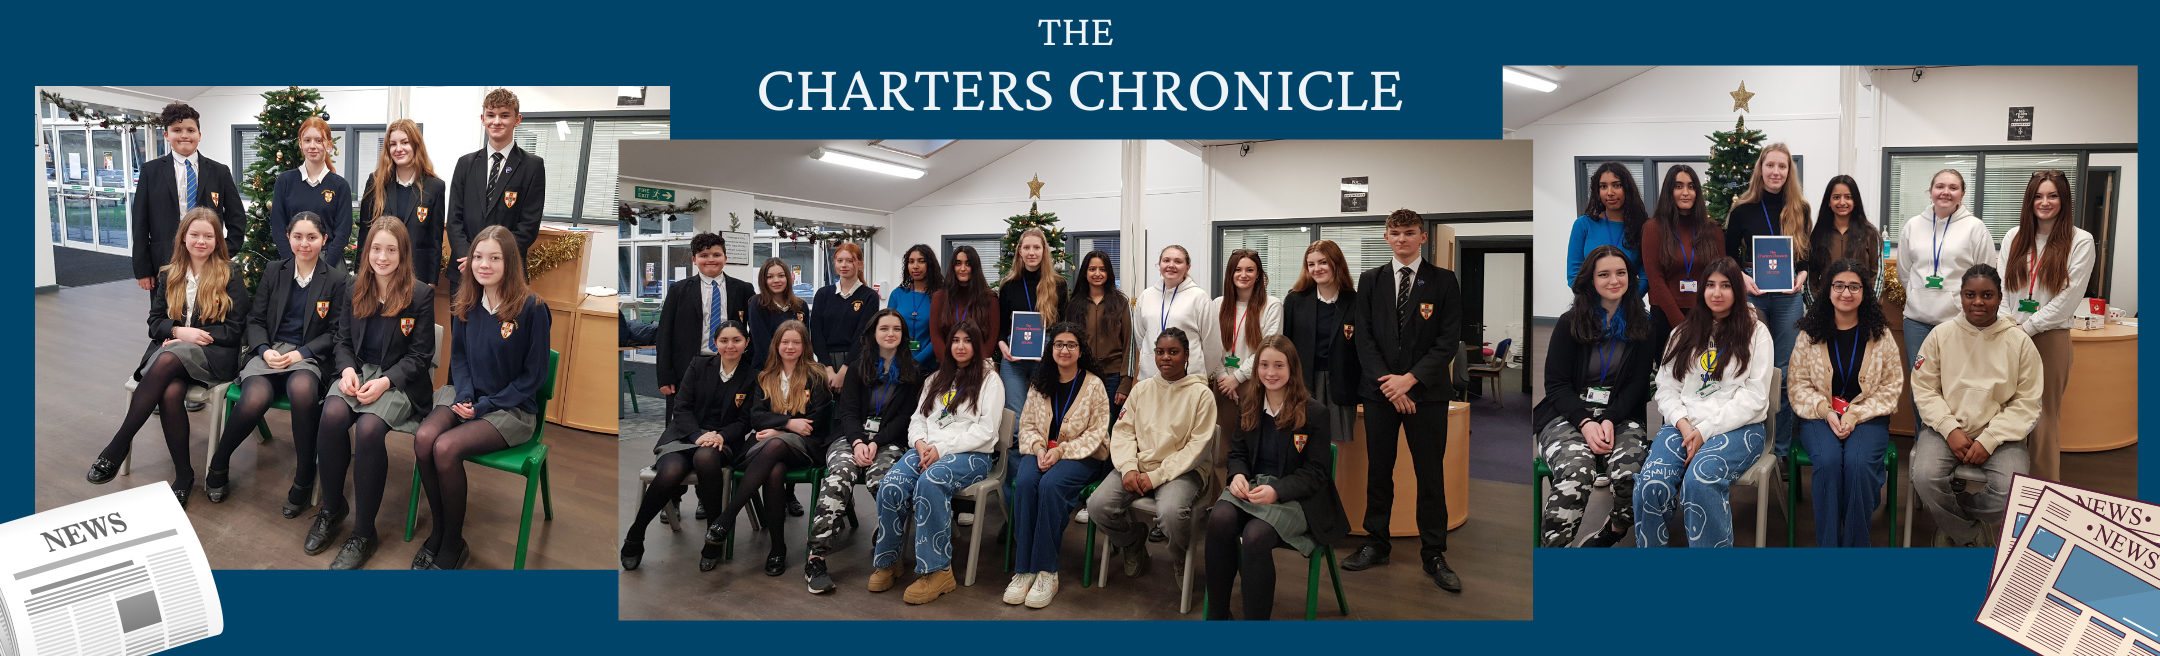 Charters Chronicles Newsteam